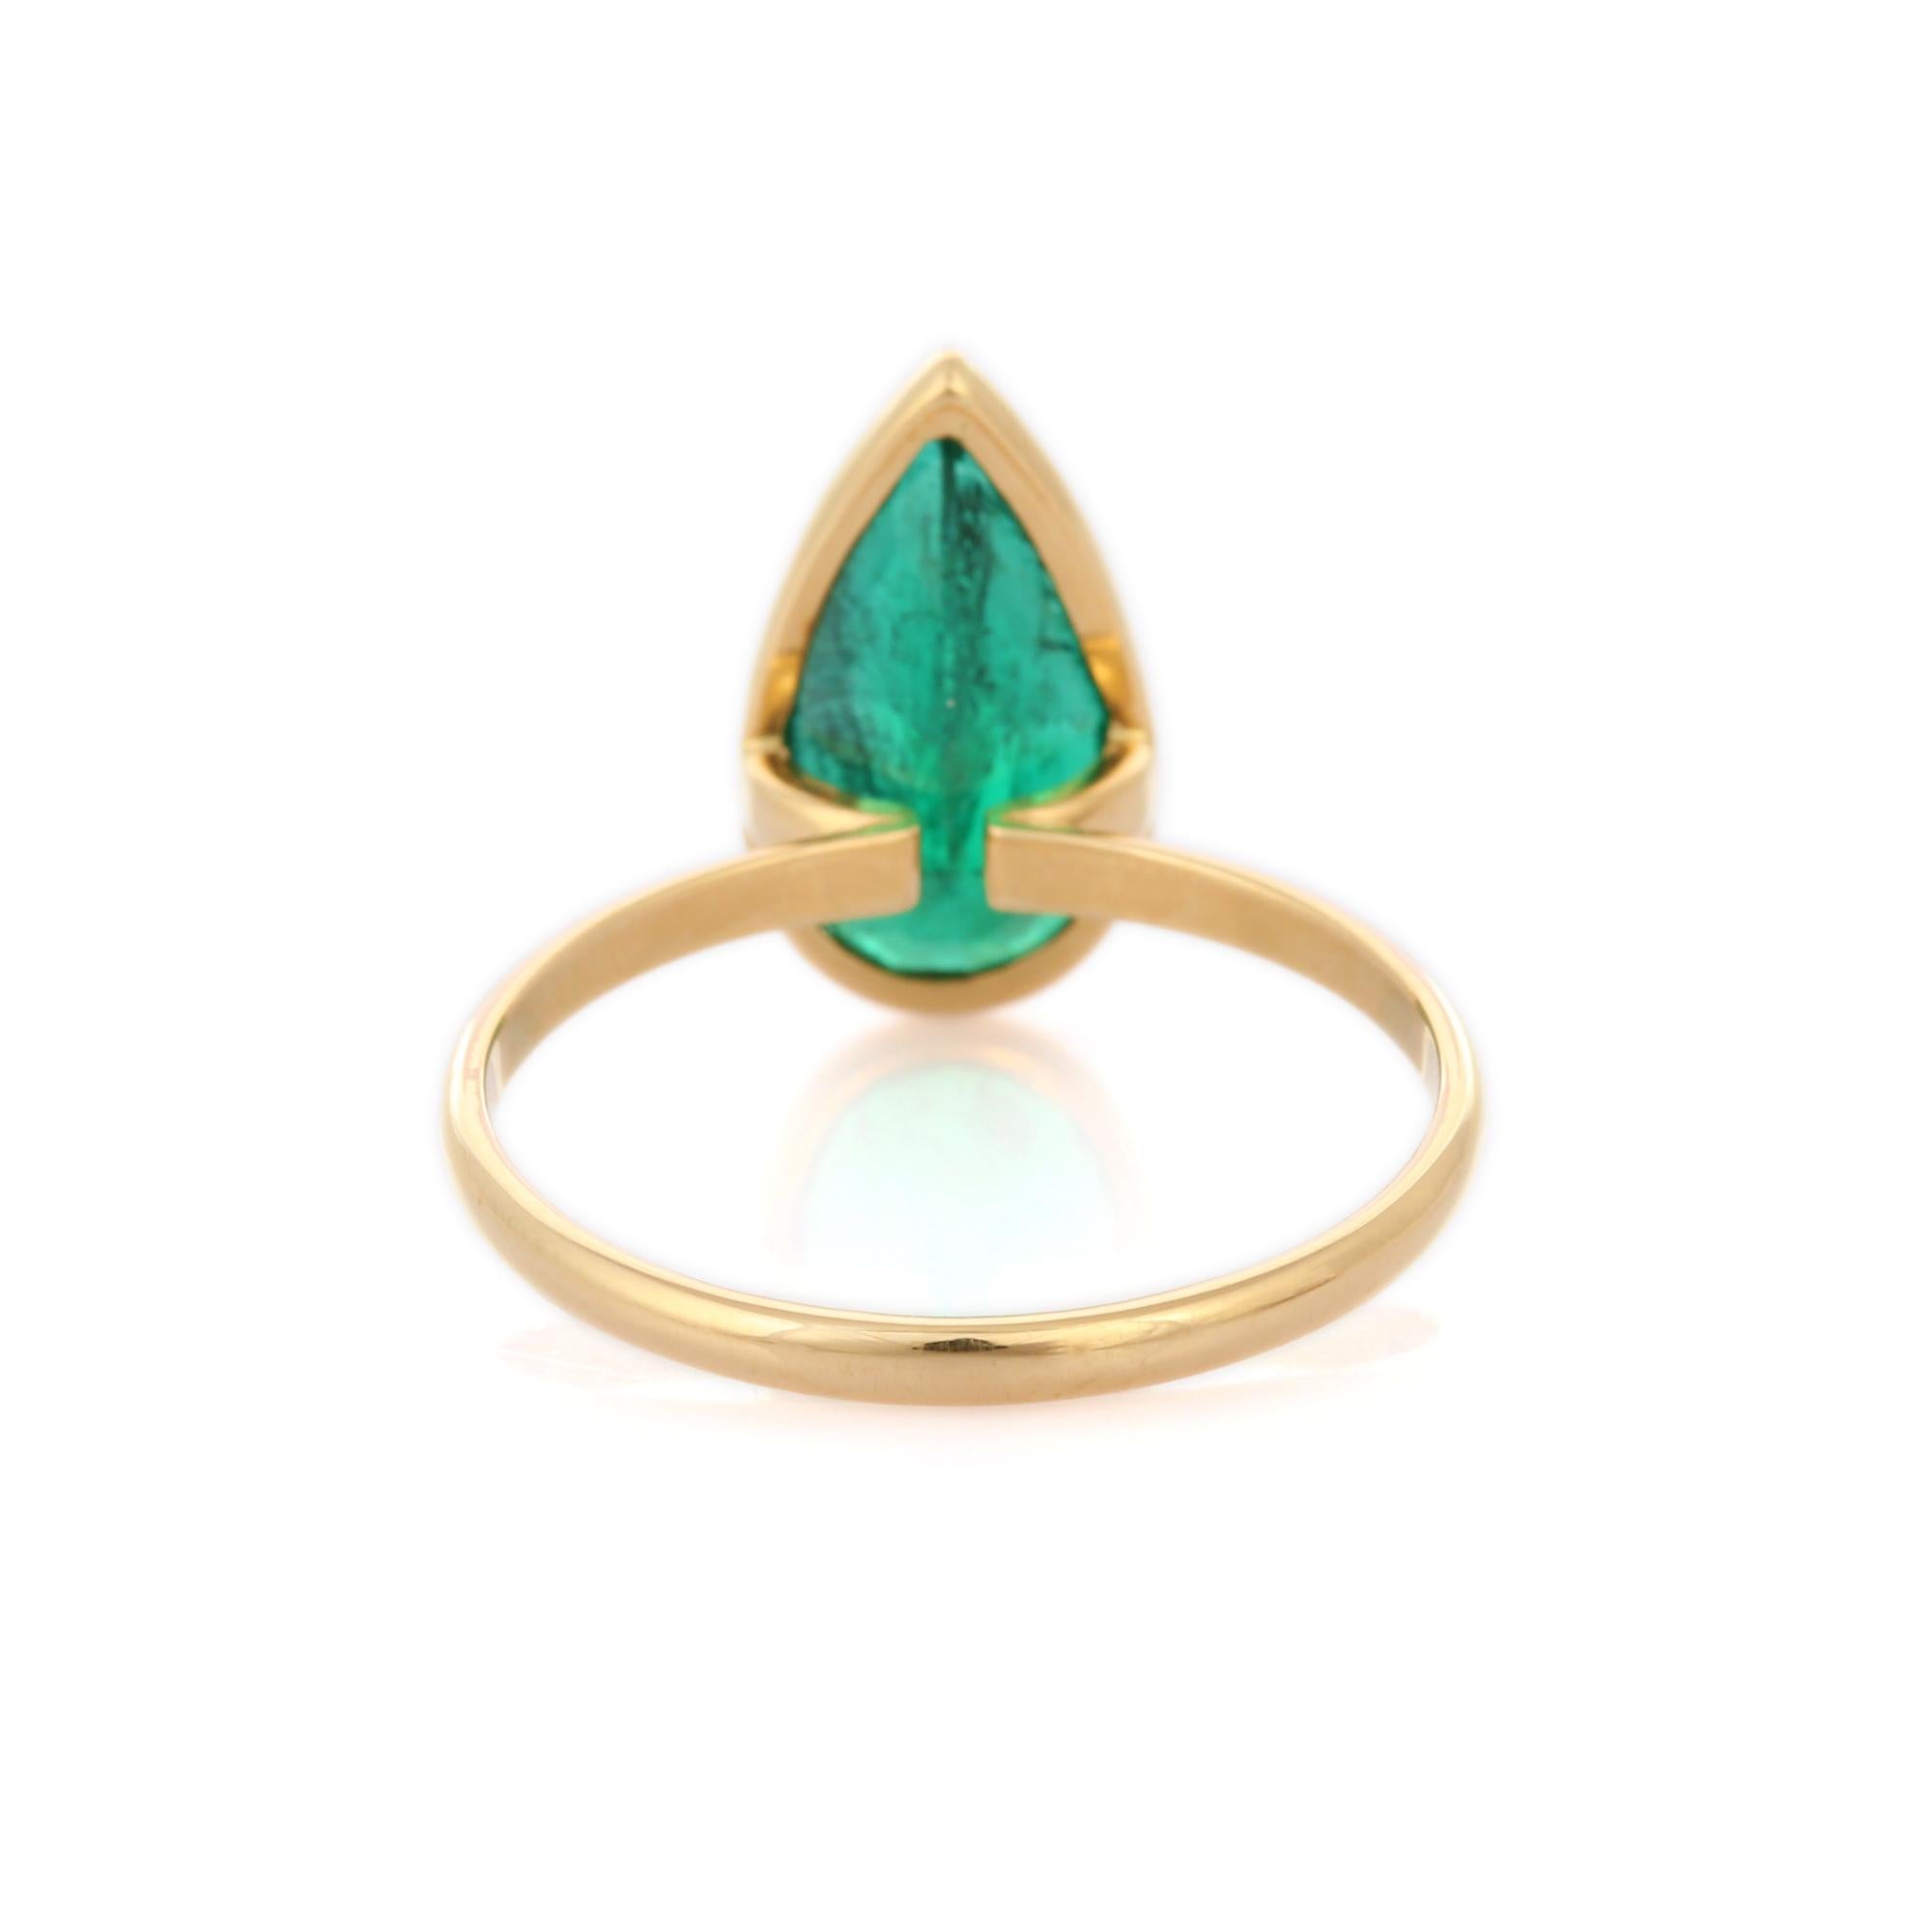 For Sale:  Enticing 2.9 ct Green Pear Cut Emerald Solitaire Wedding Ring in 18K Yellow Gold 4